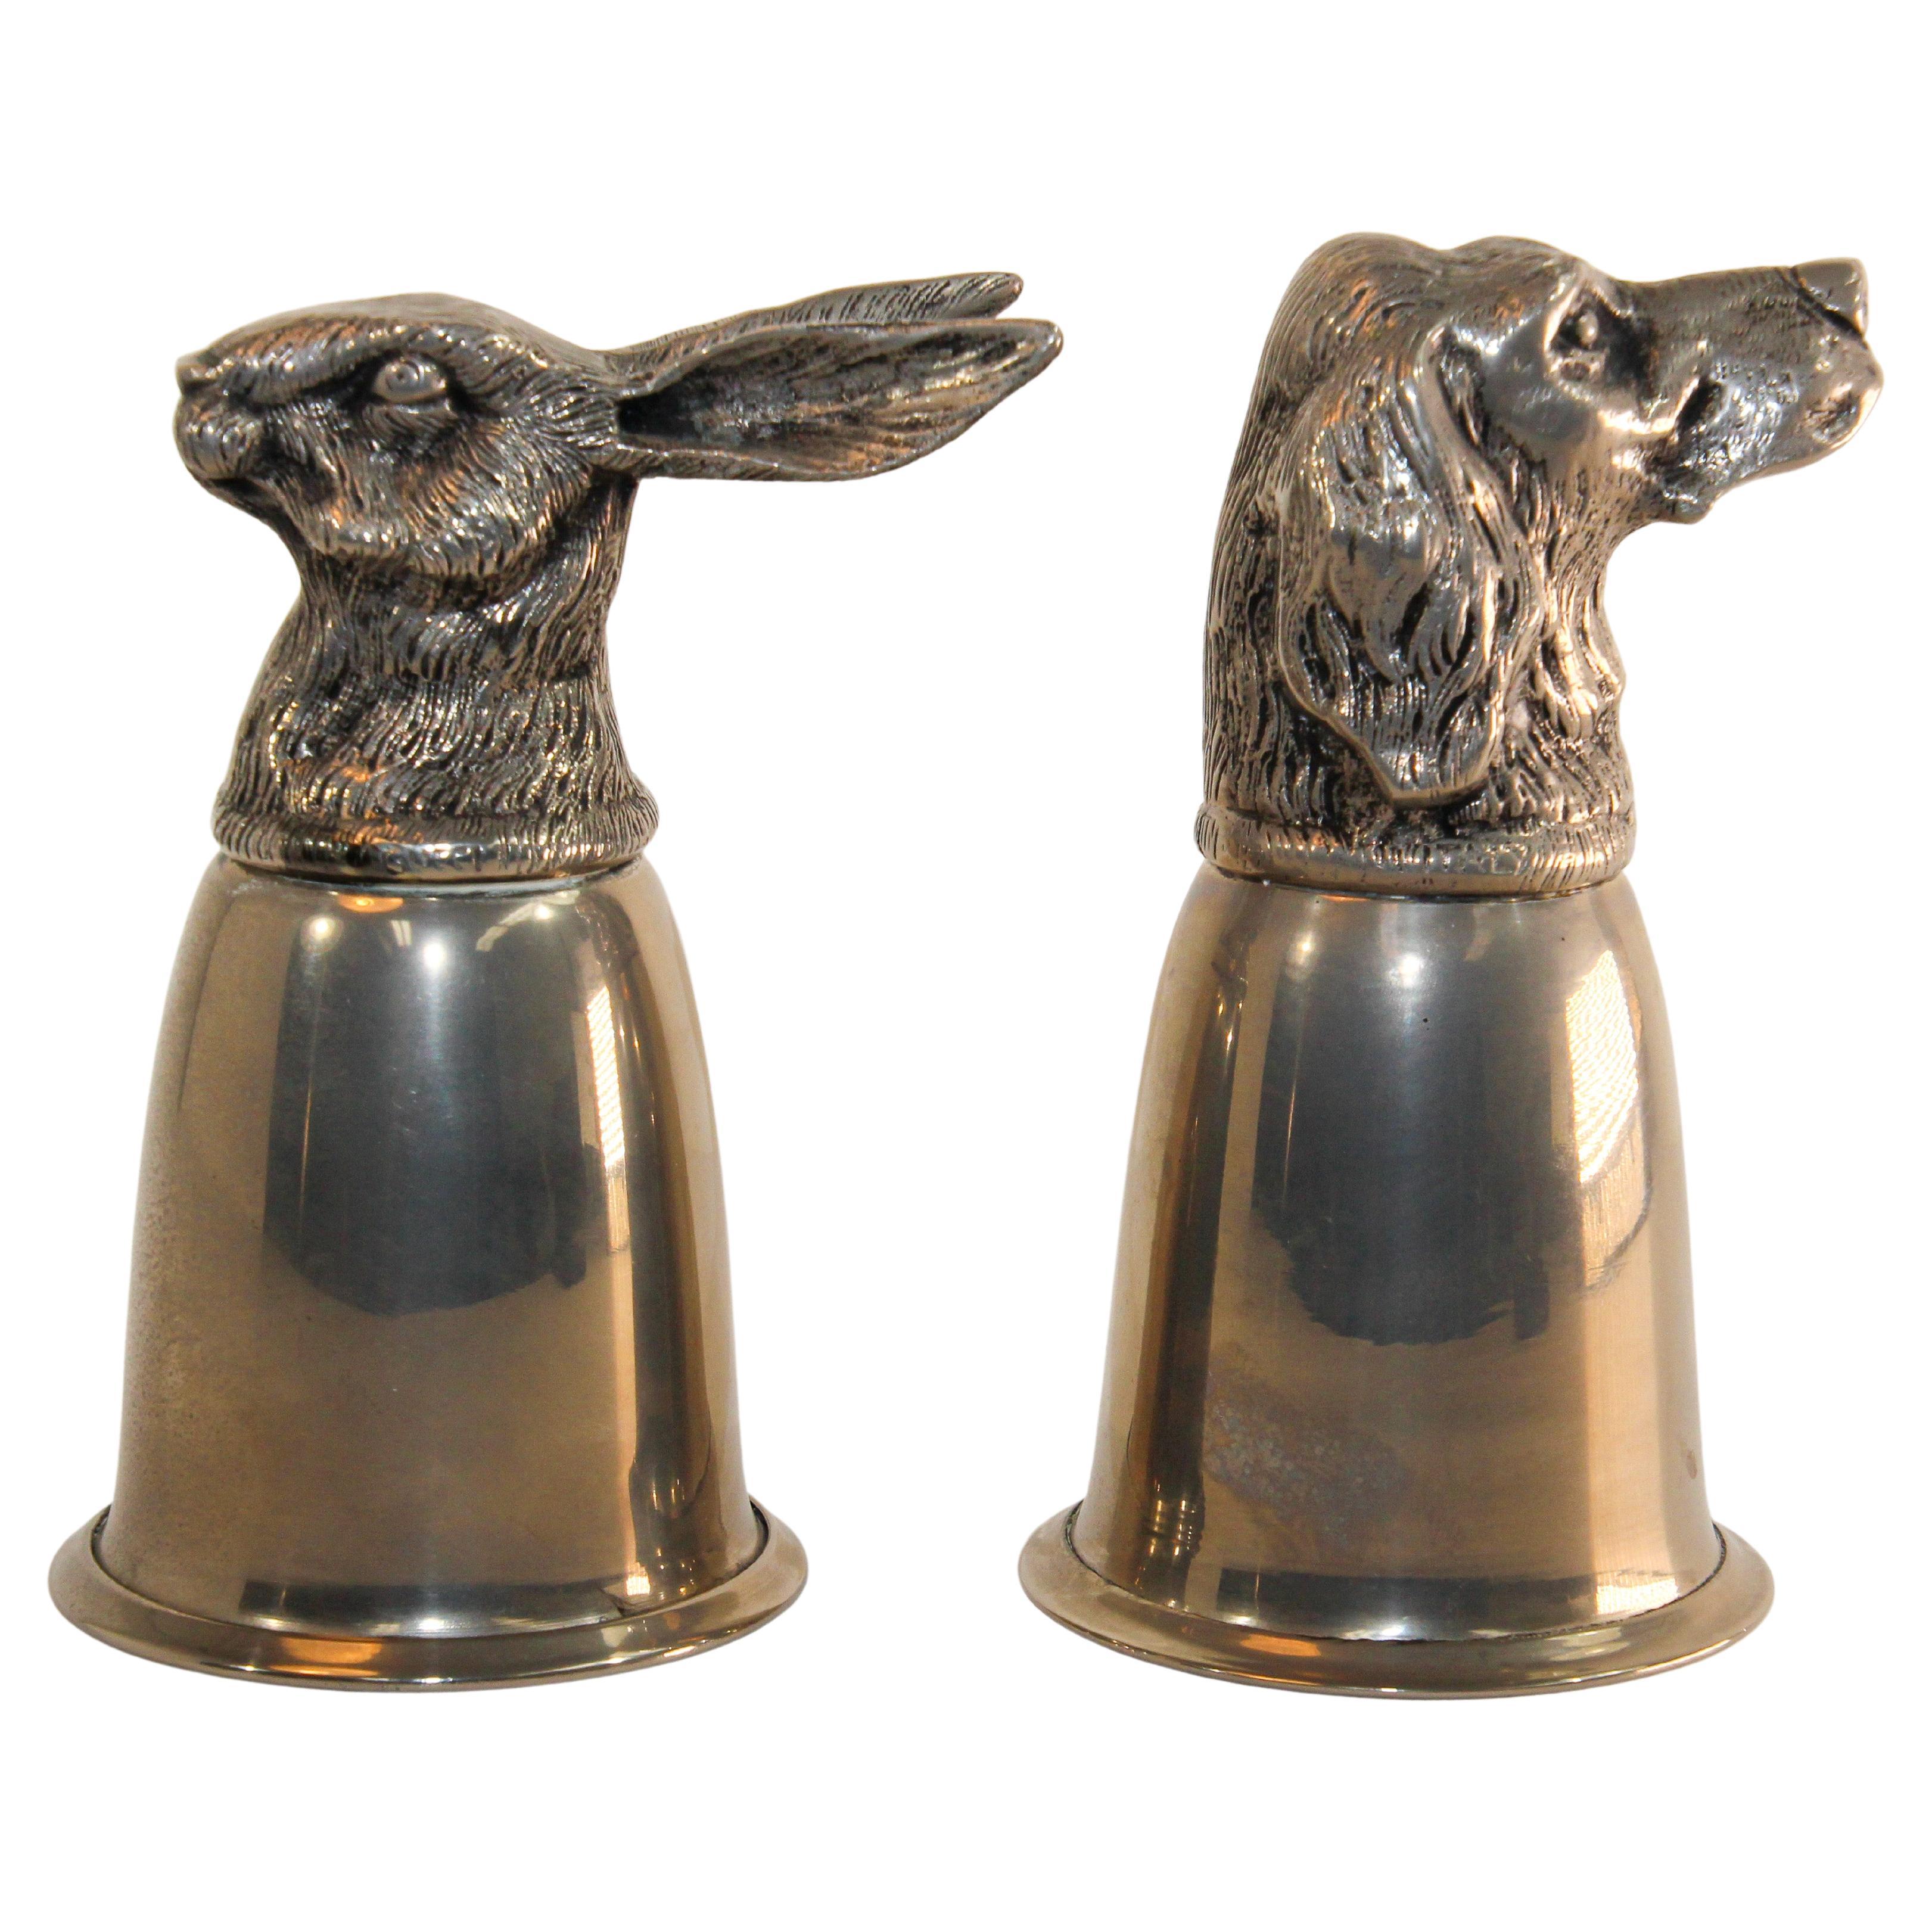 Vintage Gucci silver plated animal stirrup cups signed Italy vintage circa 1970s.
The set include one Gucci hare and one Gucci dog.
If a ritual involves drinking, then you need a suitable vessel. 
We have developed elaborate, fanciful and inventive